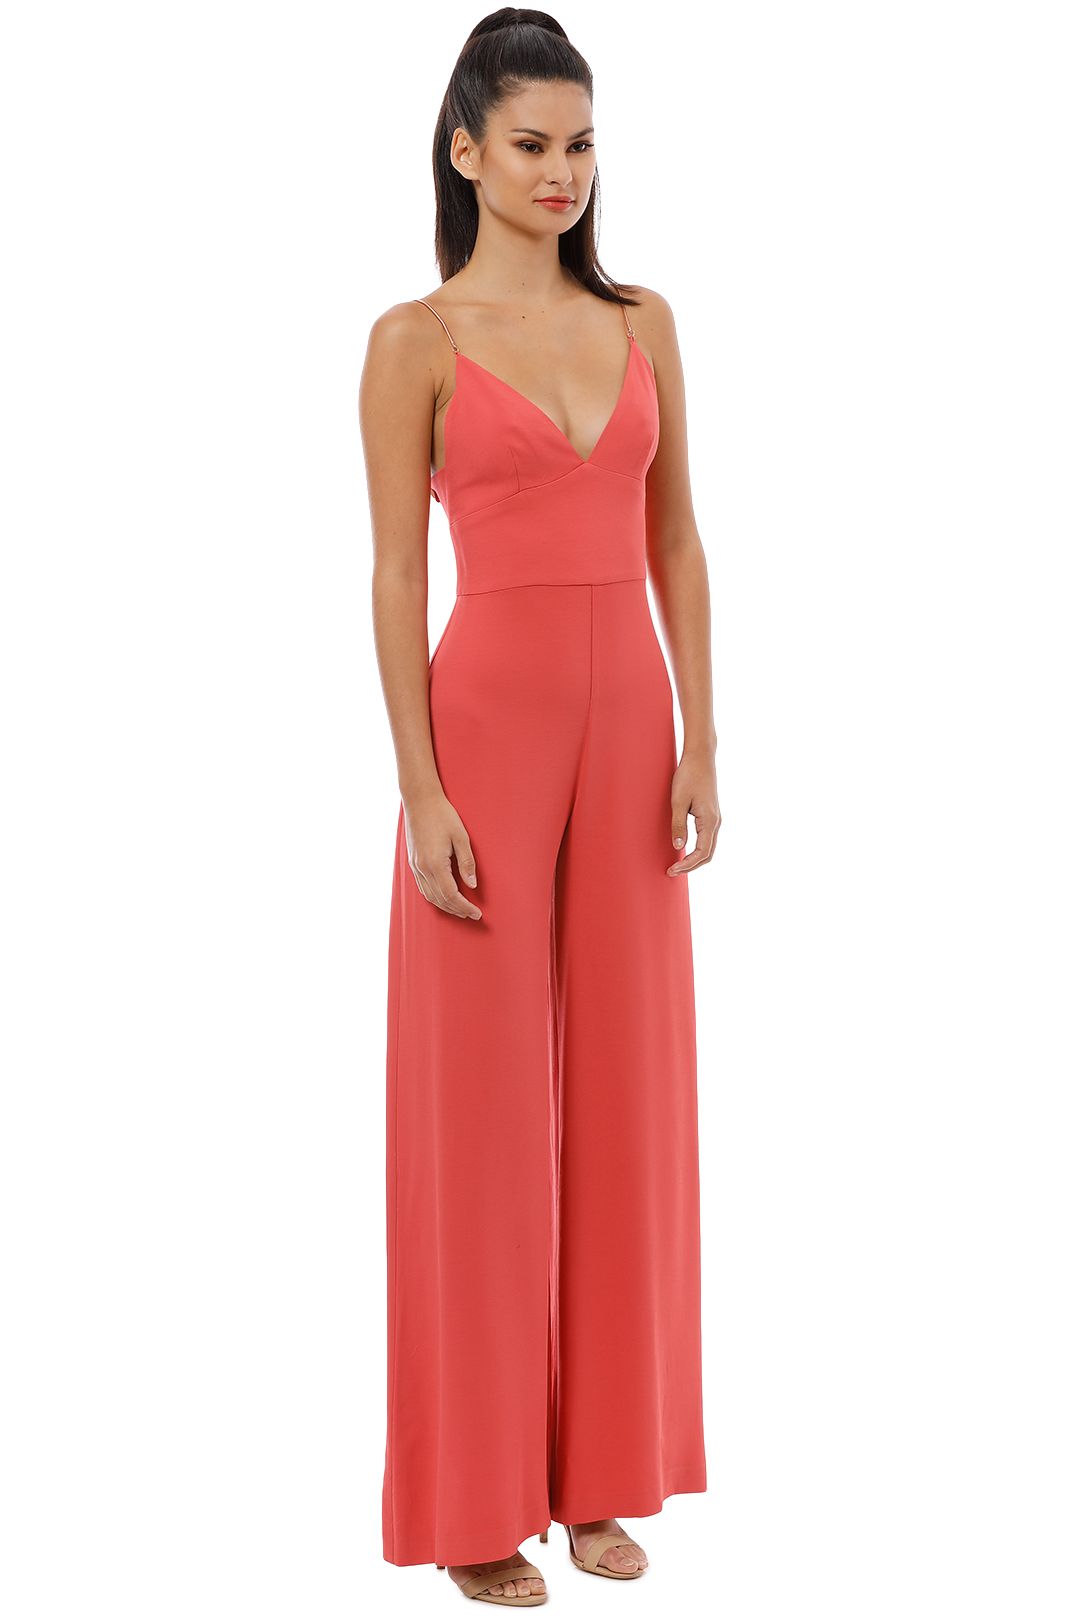 Ginger and Smart - Drift Jumpsuit - Coral - Side